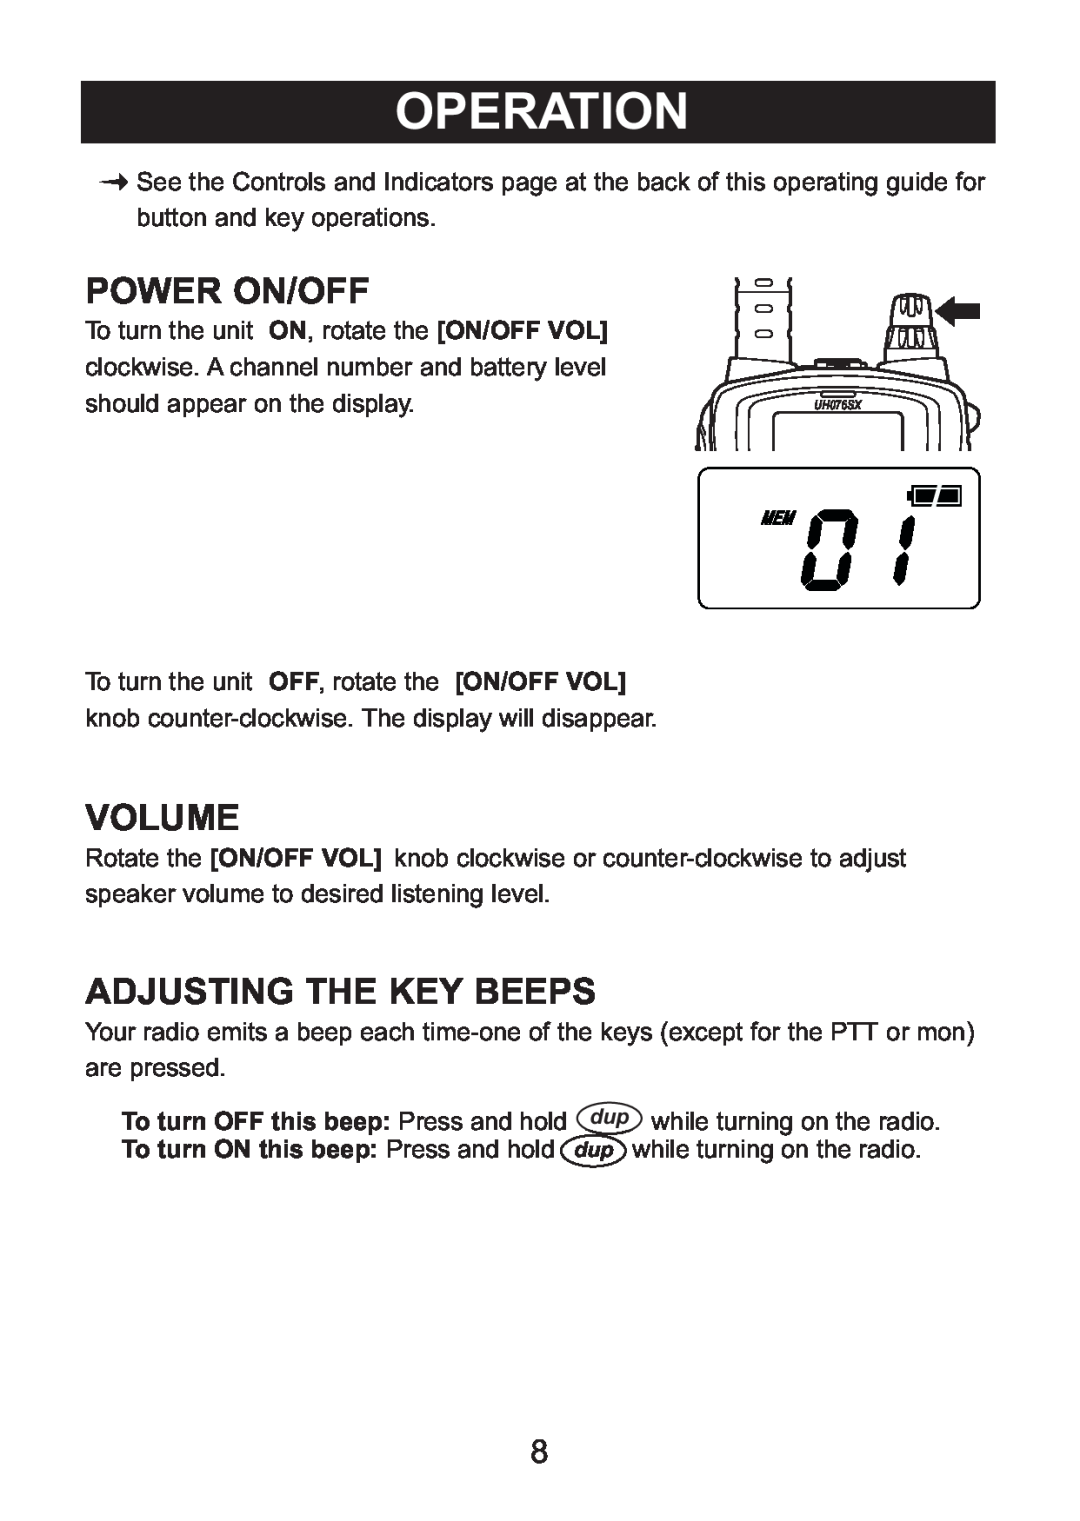 Uniden UH076SX owner manual Operation, Power On/Off, Volume, Adjusting The Key Beeps, dup while turning on the radio 